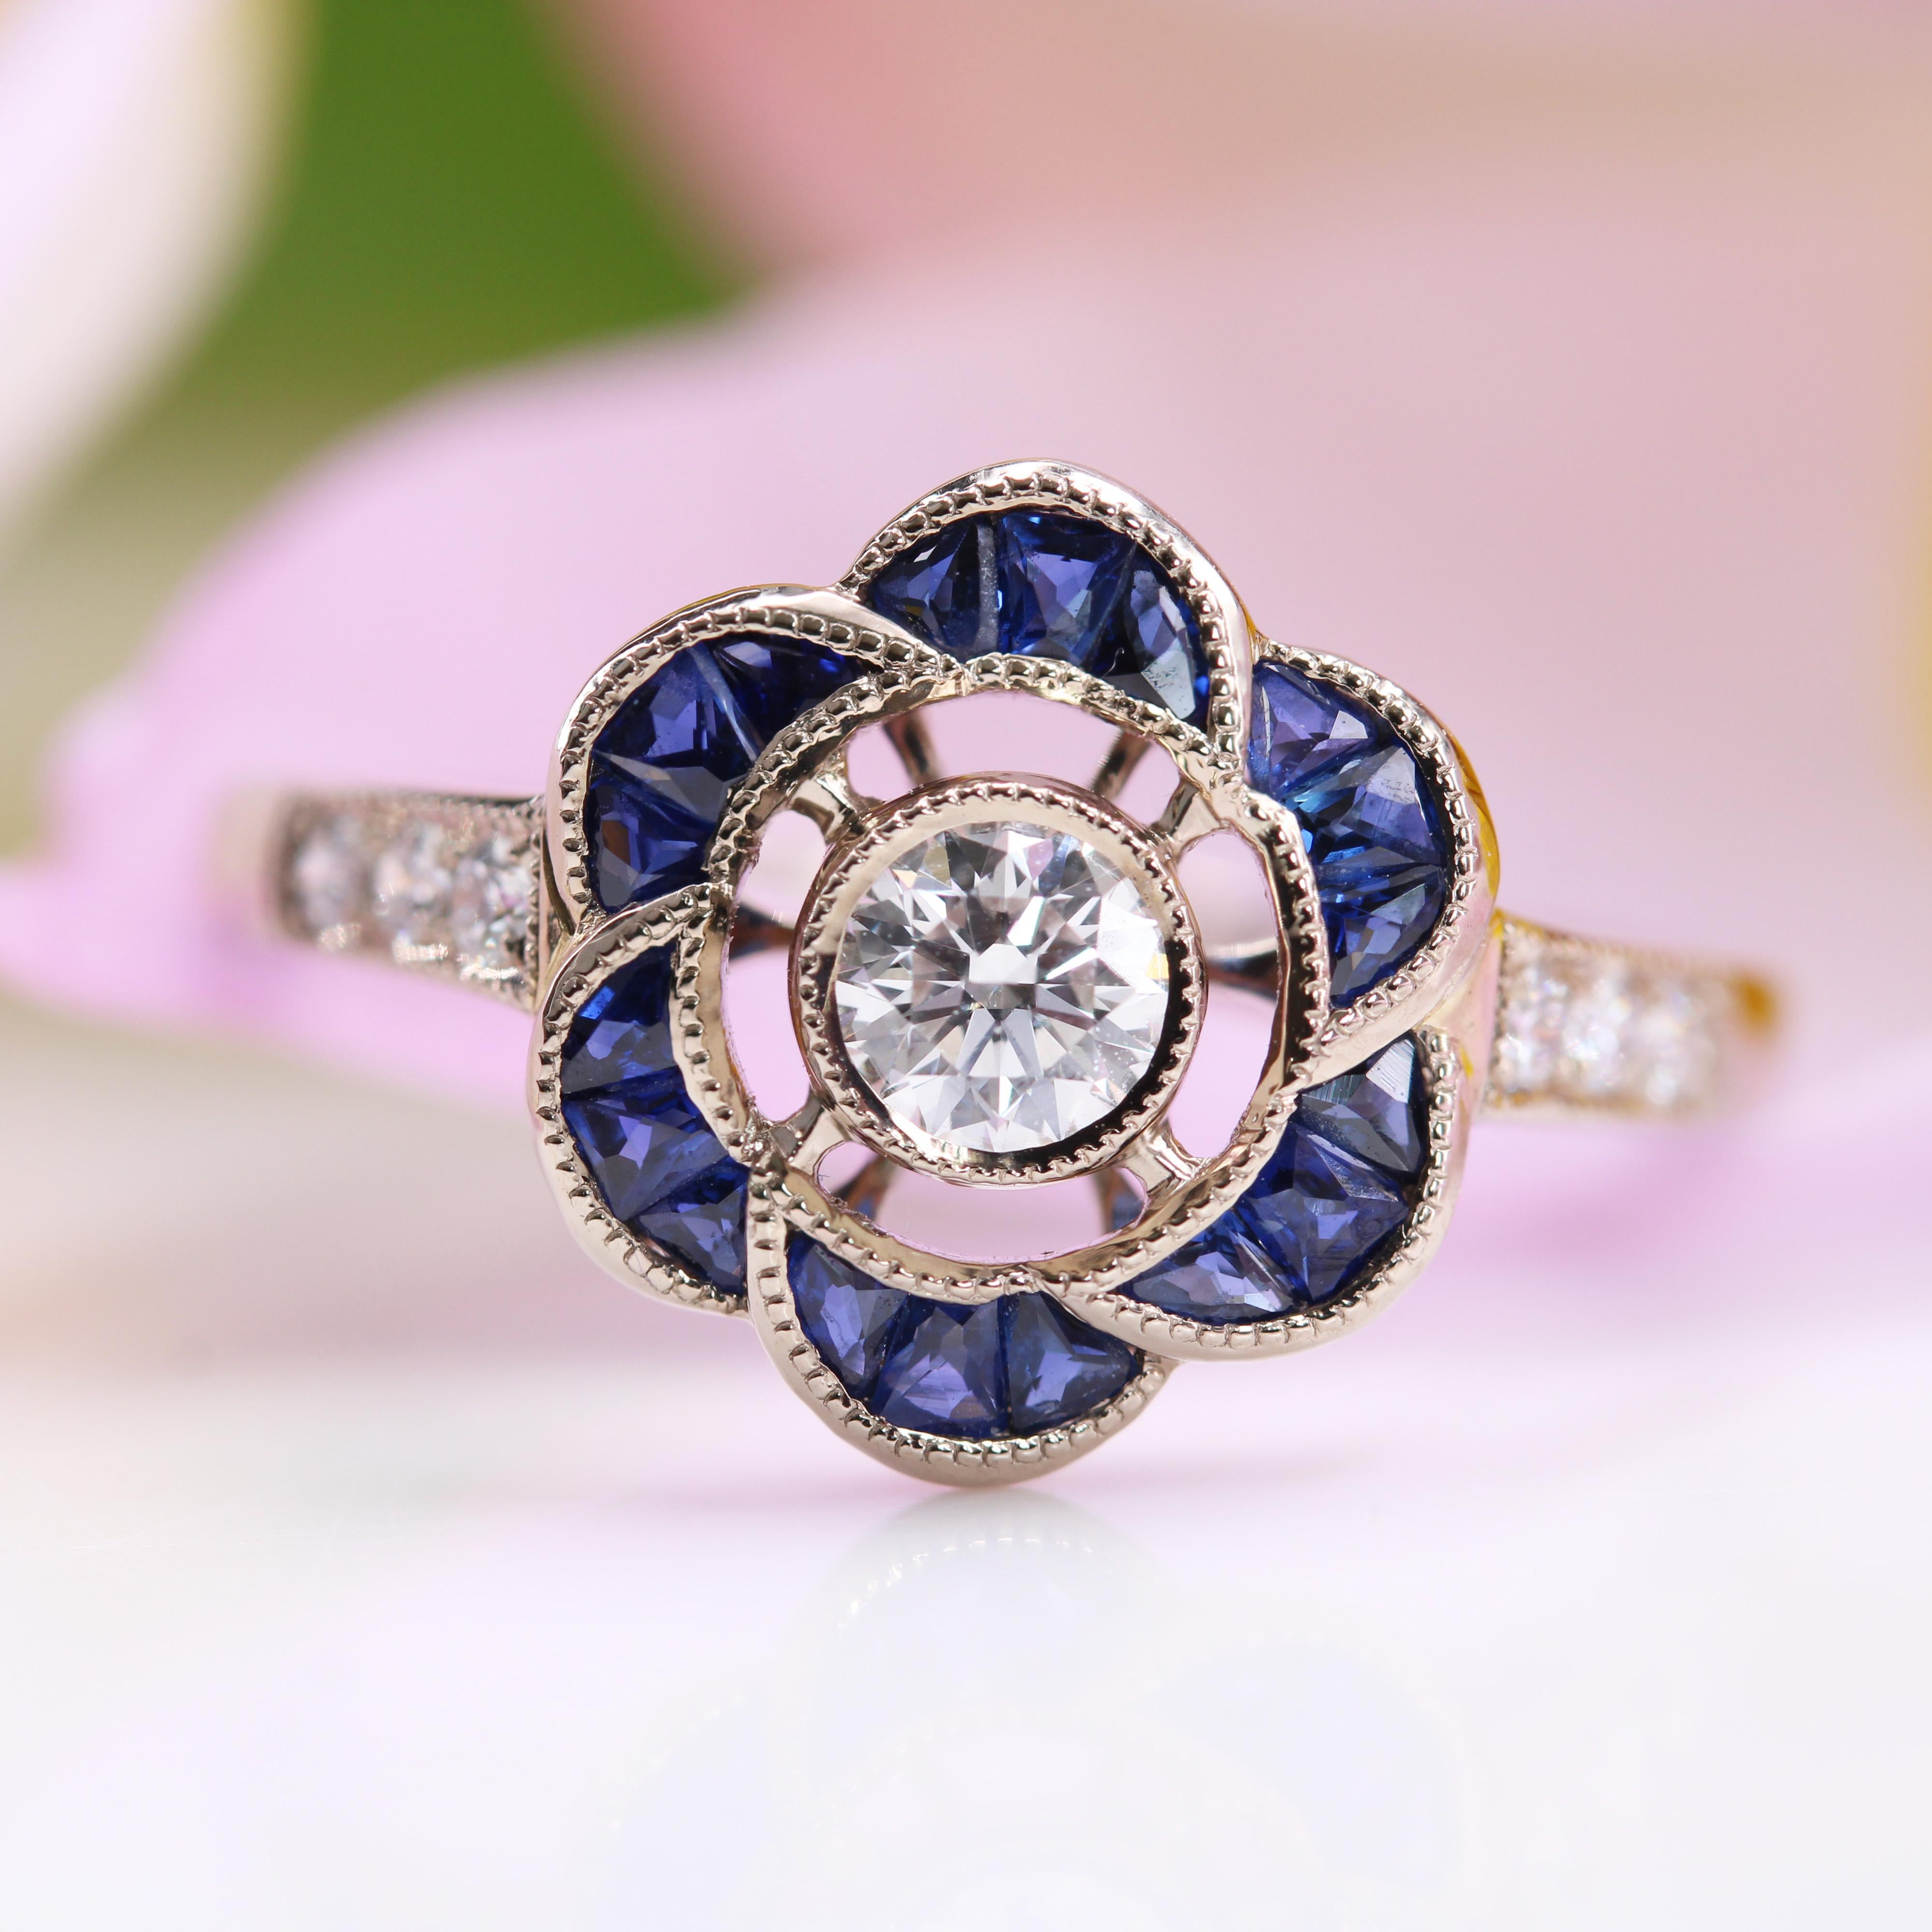 Brilliant Cut New Art Deco Style Calibrated Sapphires Diamonds 18 K White Gold Flower Ring For Sale